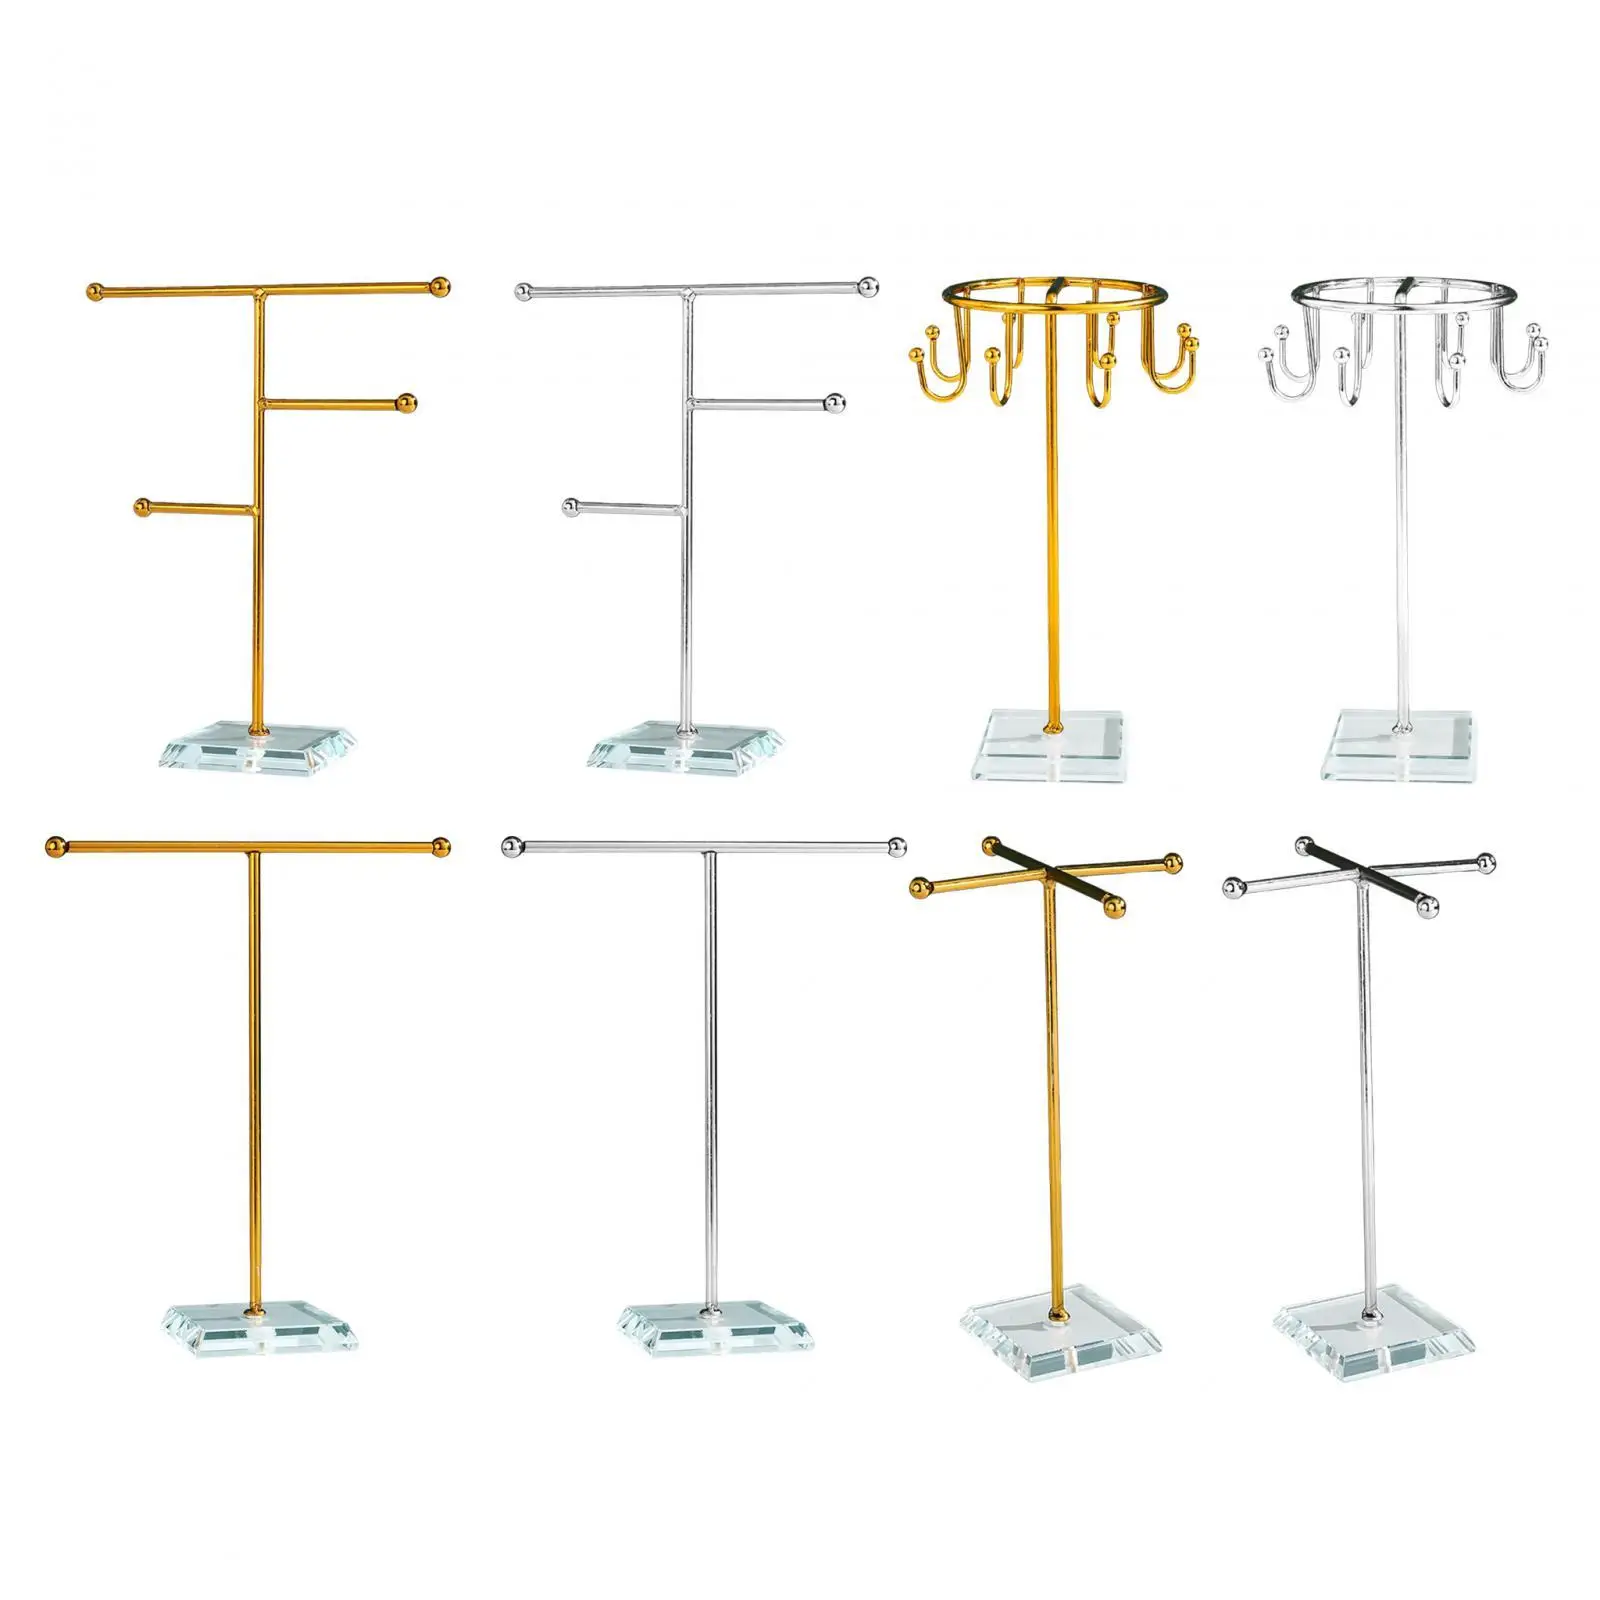 Jewelry Stand T Shaped Minimalist Tabletop Jewelry Organizer Jewelry Holder for Hanging Pendant Earrings Ring Bracelet Bangles